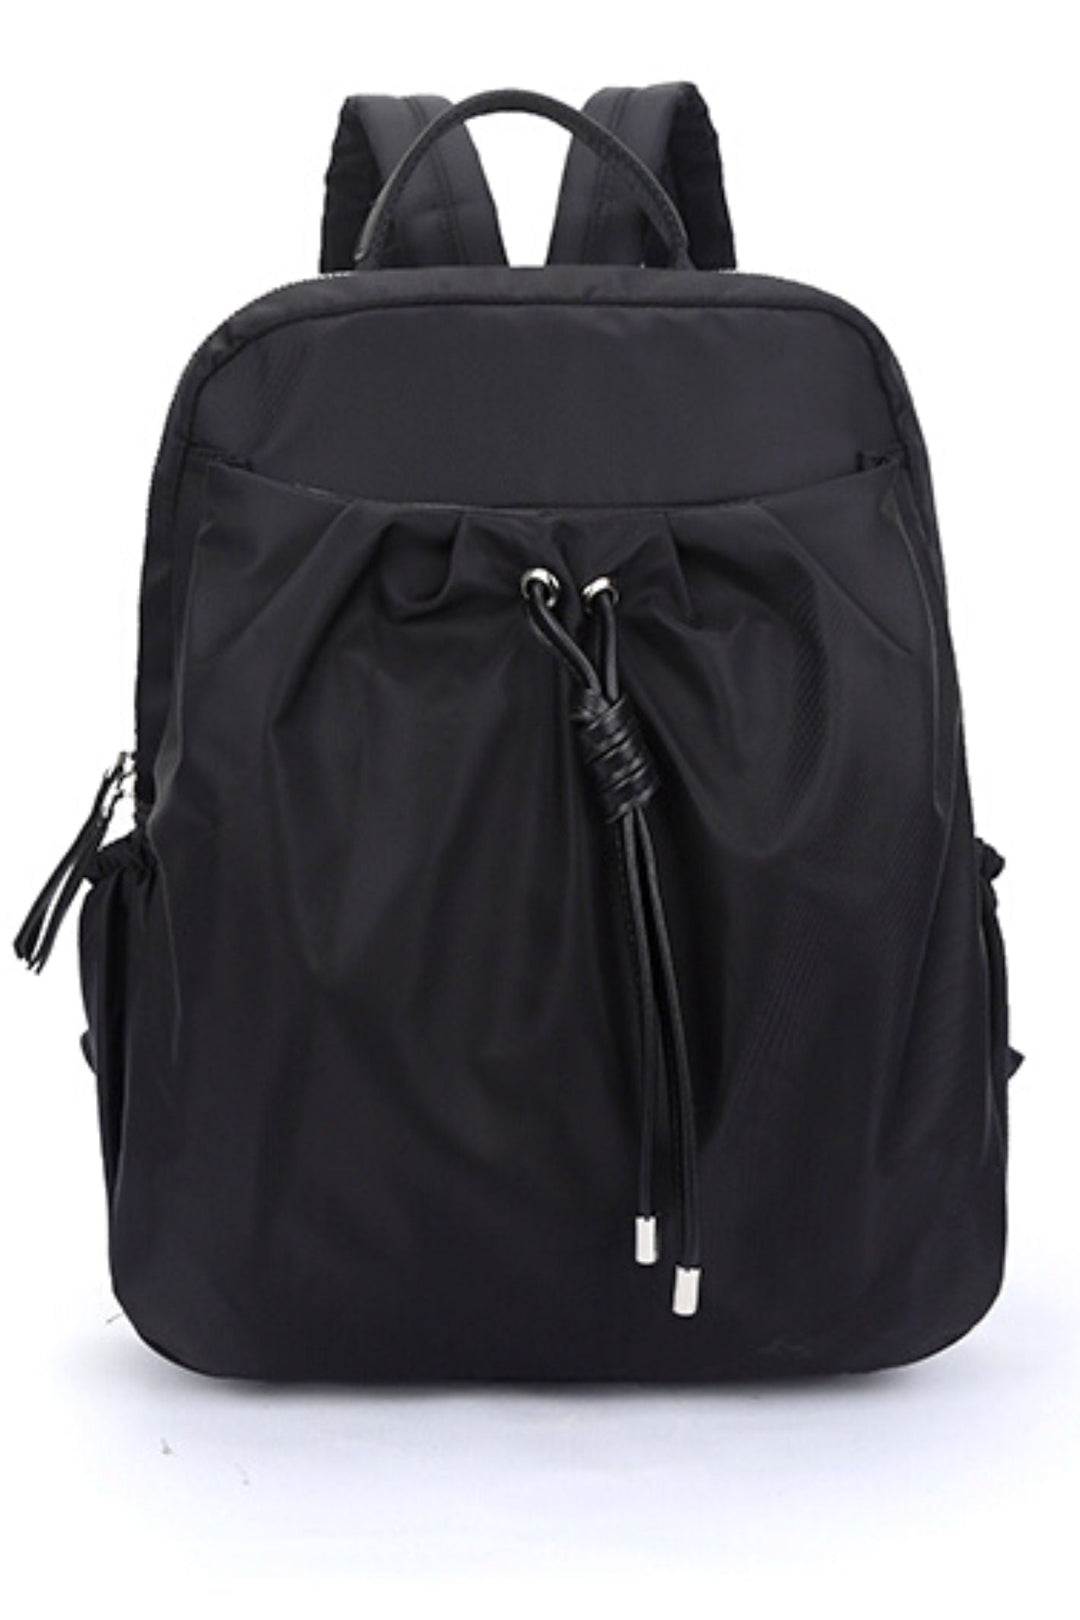 Polly Backpack Black - Sugarplum Boutique